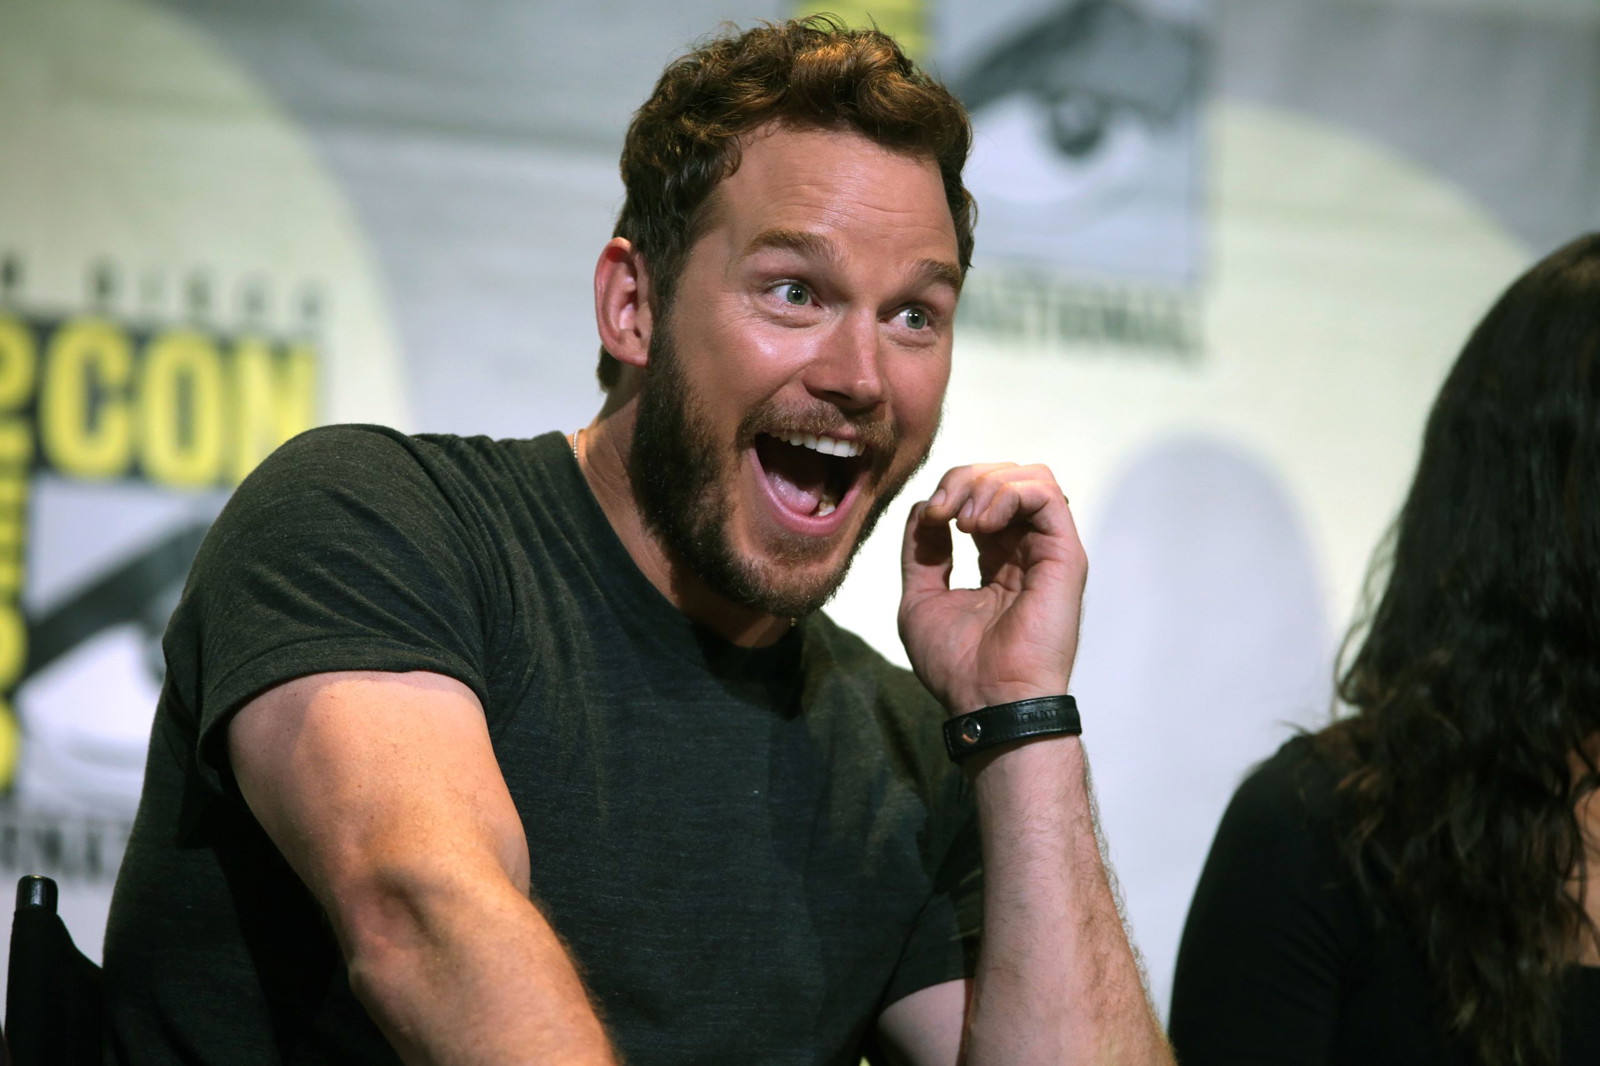 Chris Pratt gesturing and smiling while speaking at the 2016 San Diego Comic Con International, for Guardians of the Galaxy Vol. 2